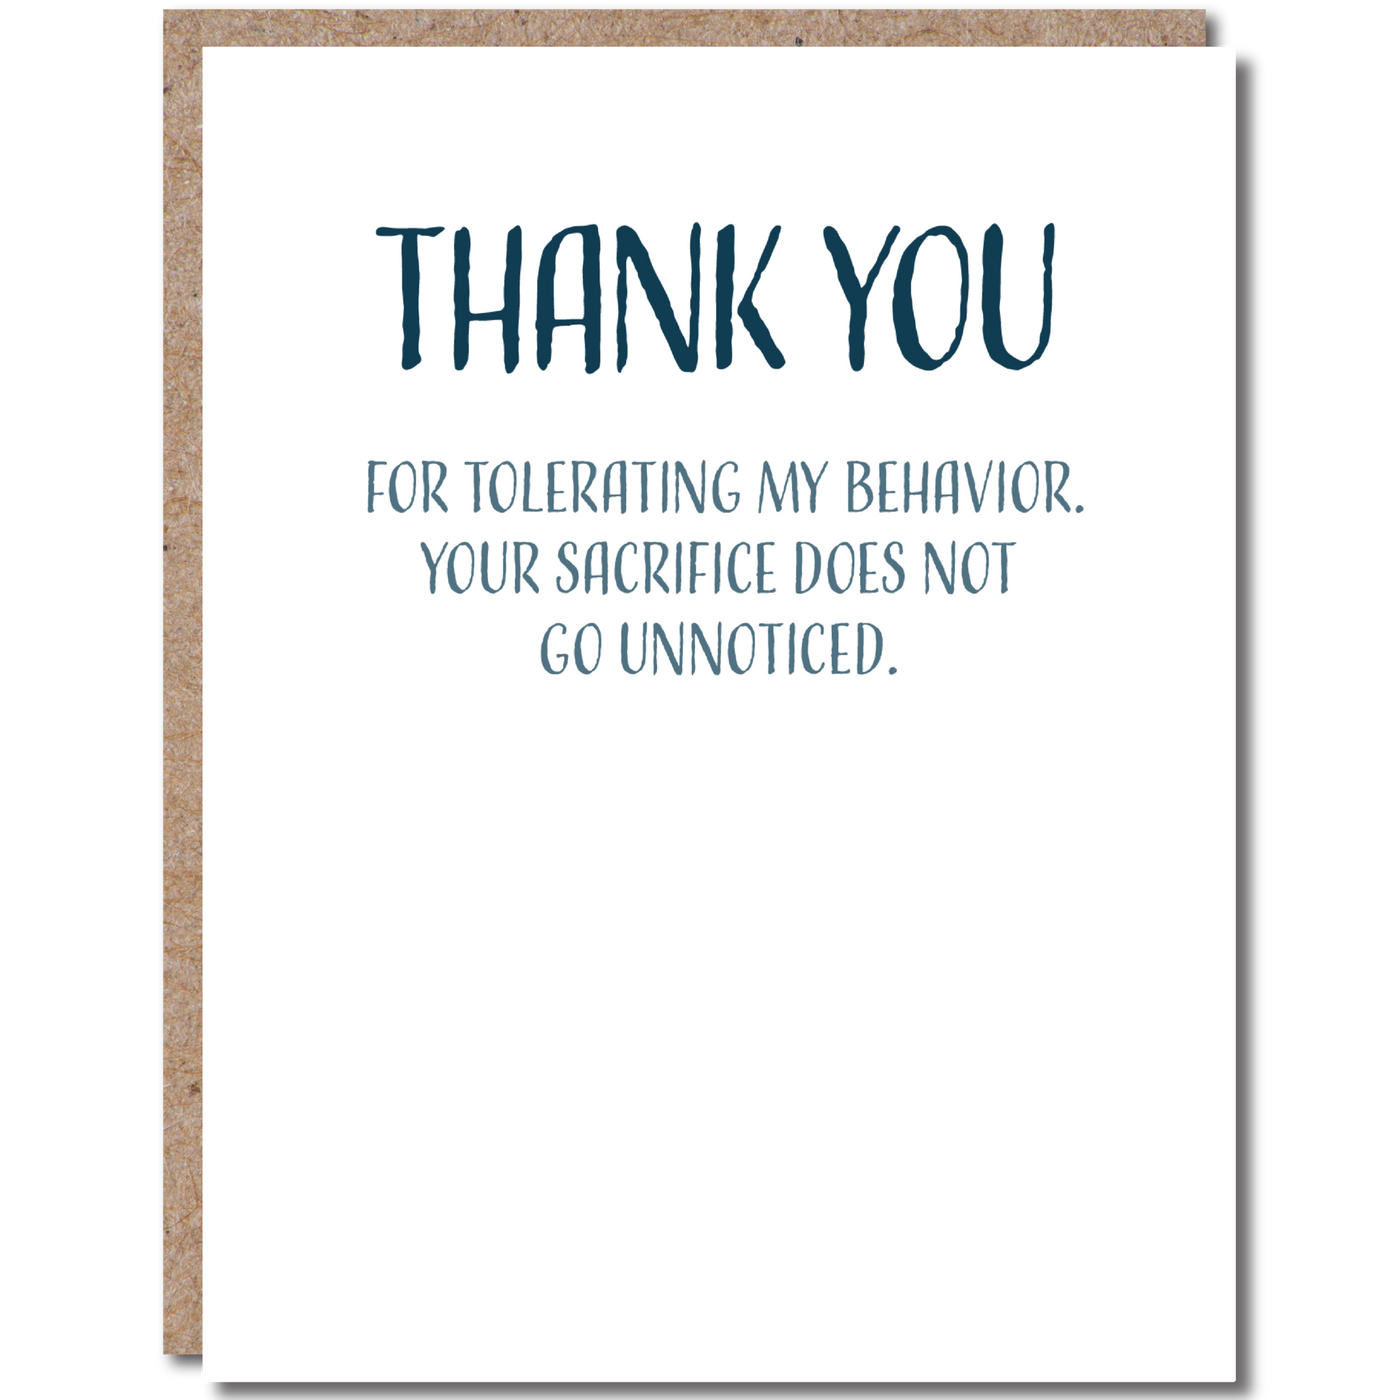 GREETING CARD "THANK YOU FOR TOLERATING MY BEHAVIOR. YOUR SACRIFICE DOES NOT GO UNNOTICED."